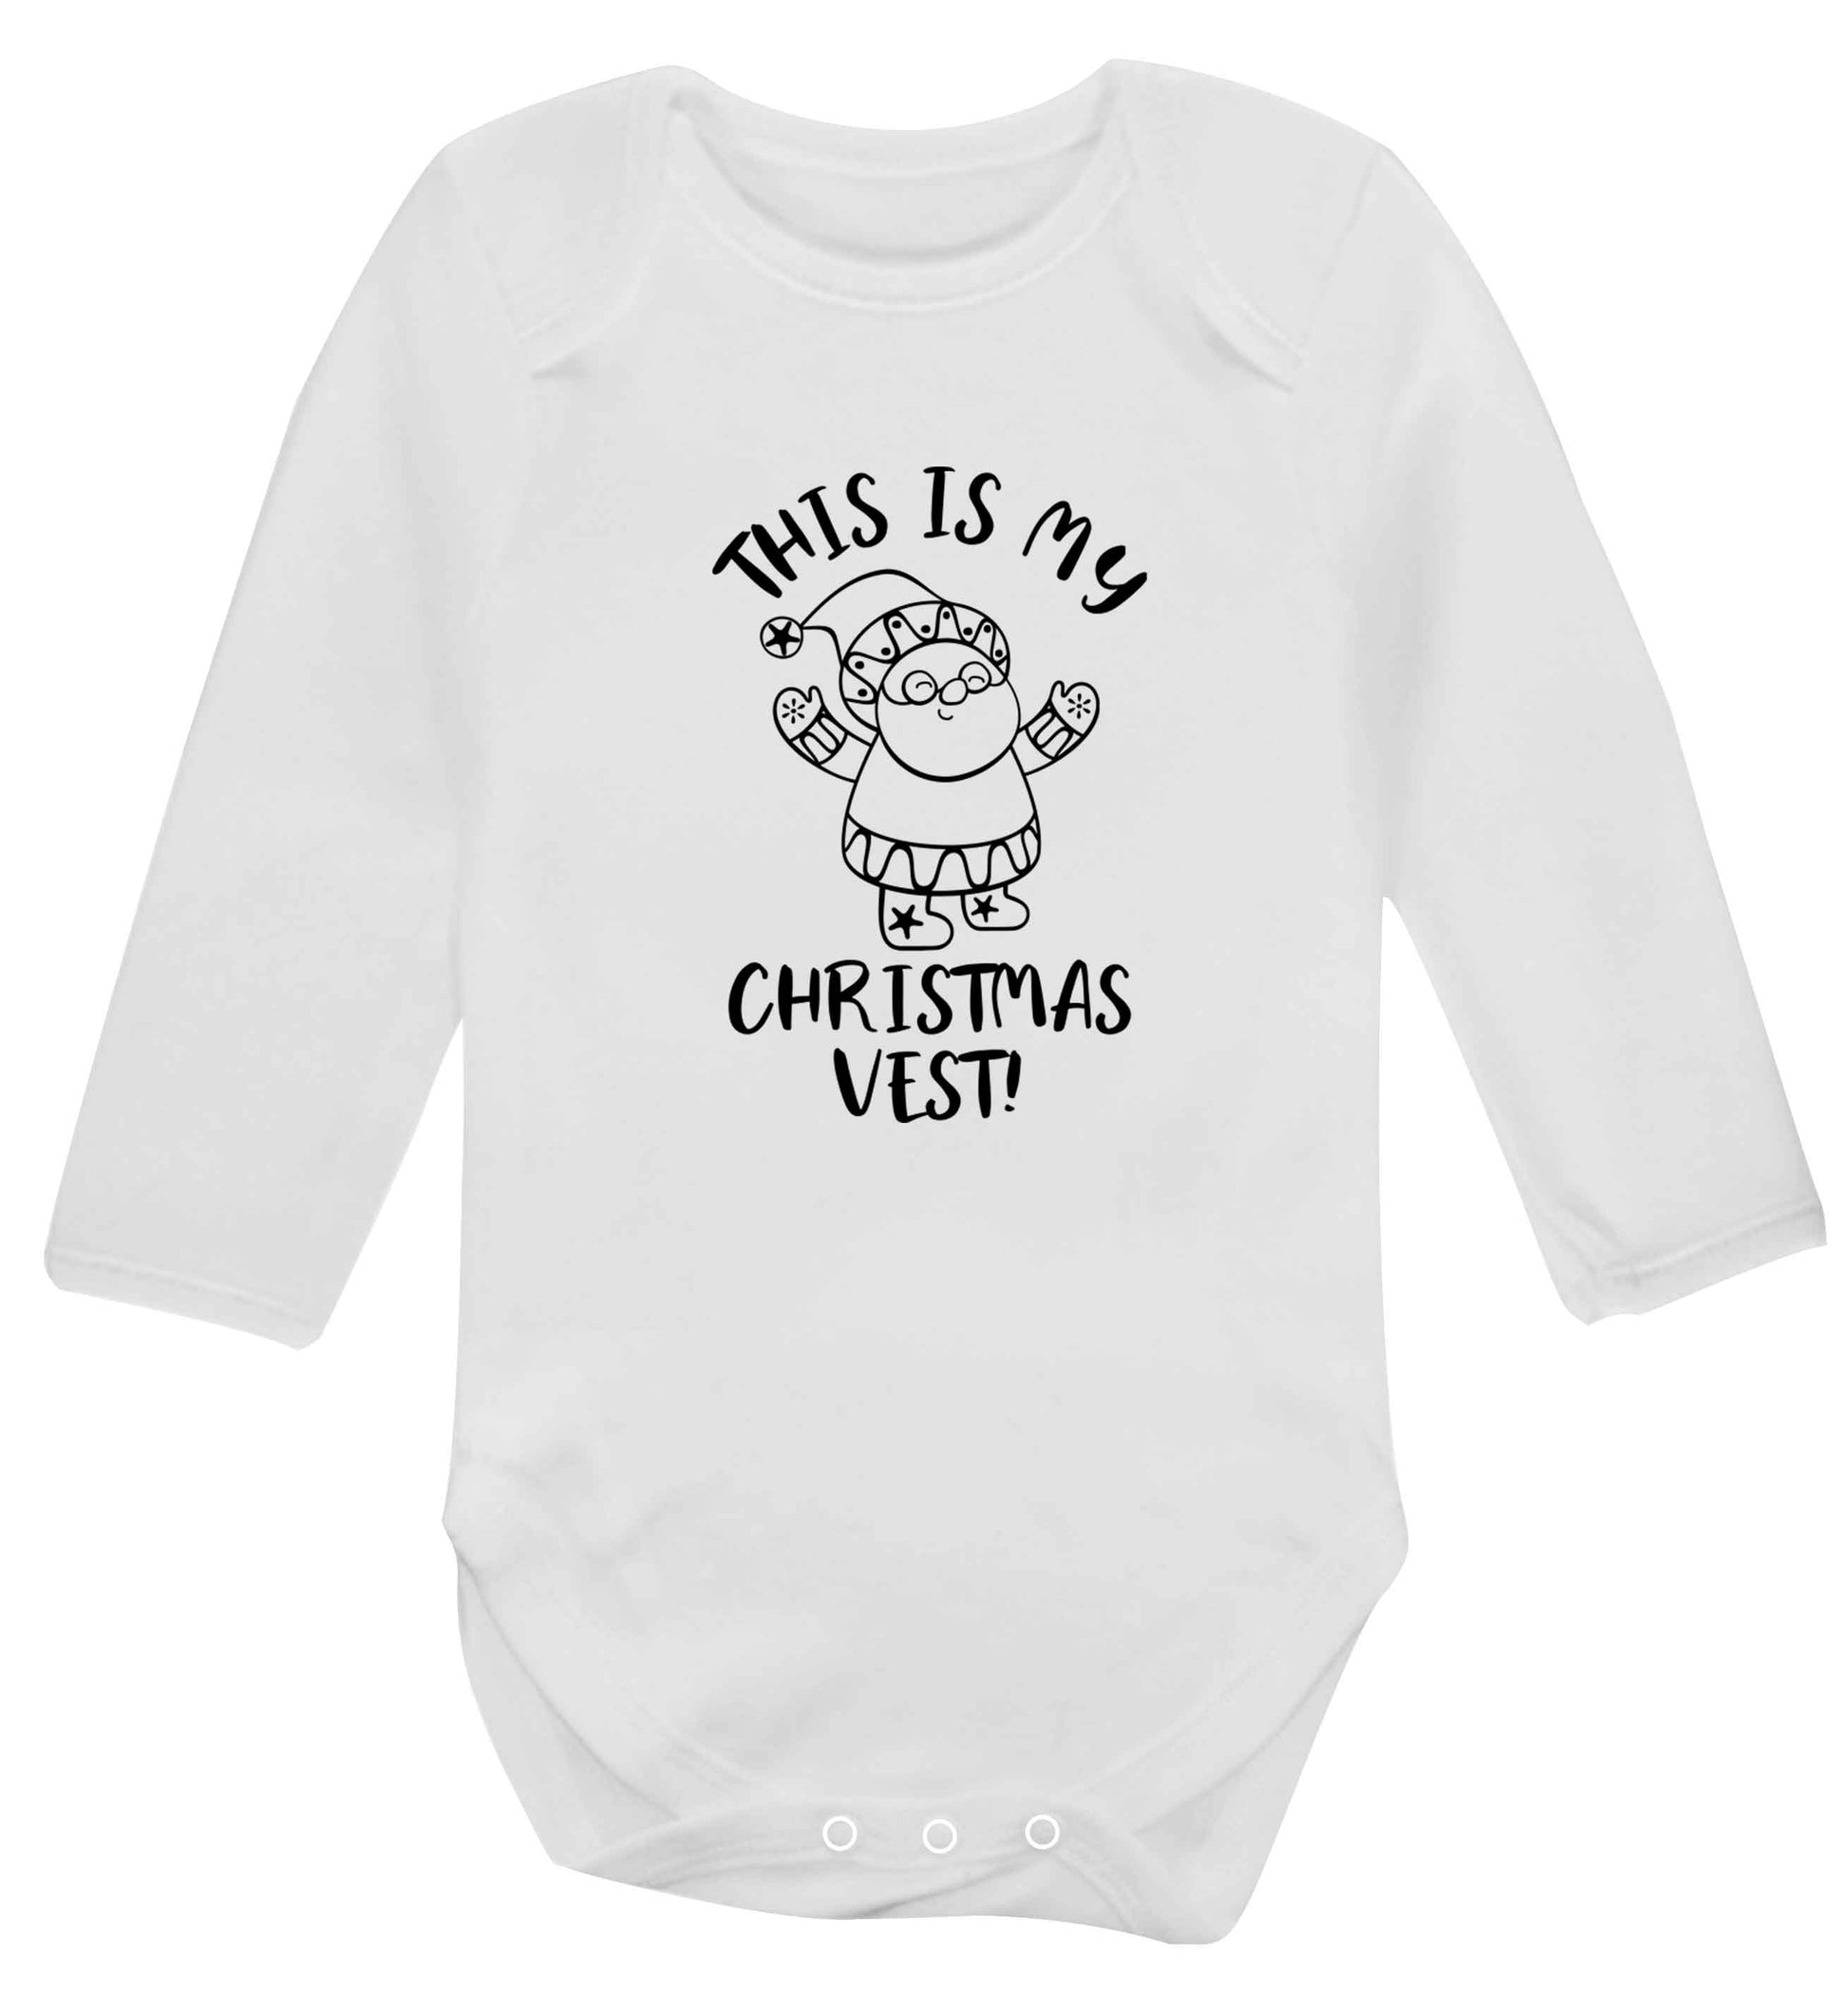 This is my Christmas vest Baby Vest long sleeved white 6-12 months